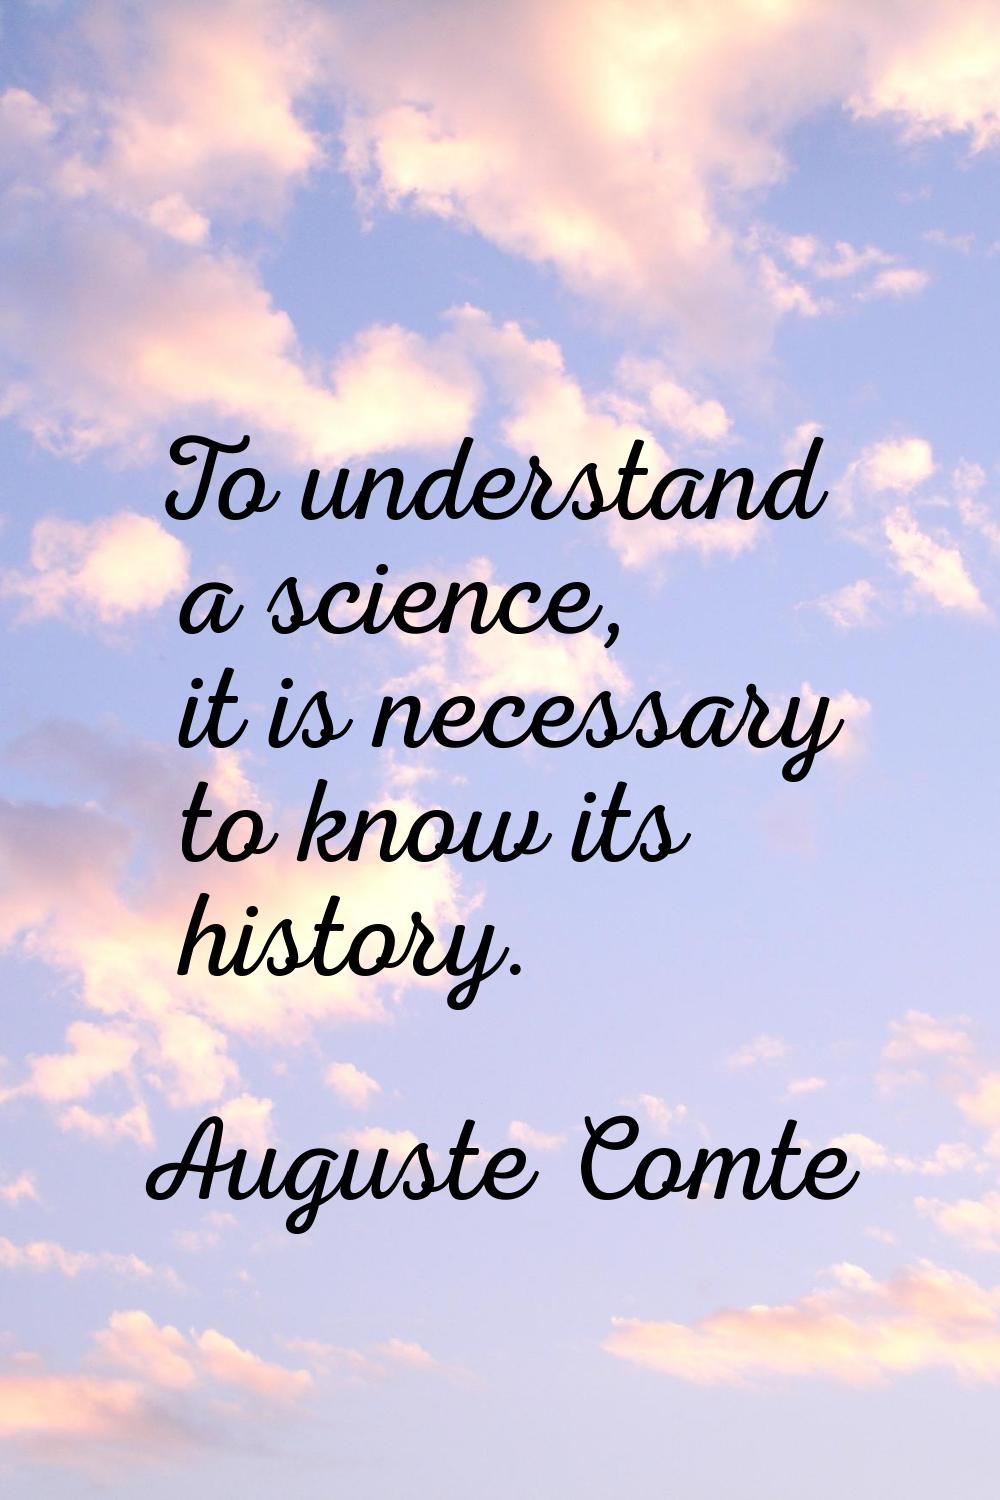 To understand a science, it is necessary to know its history.